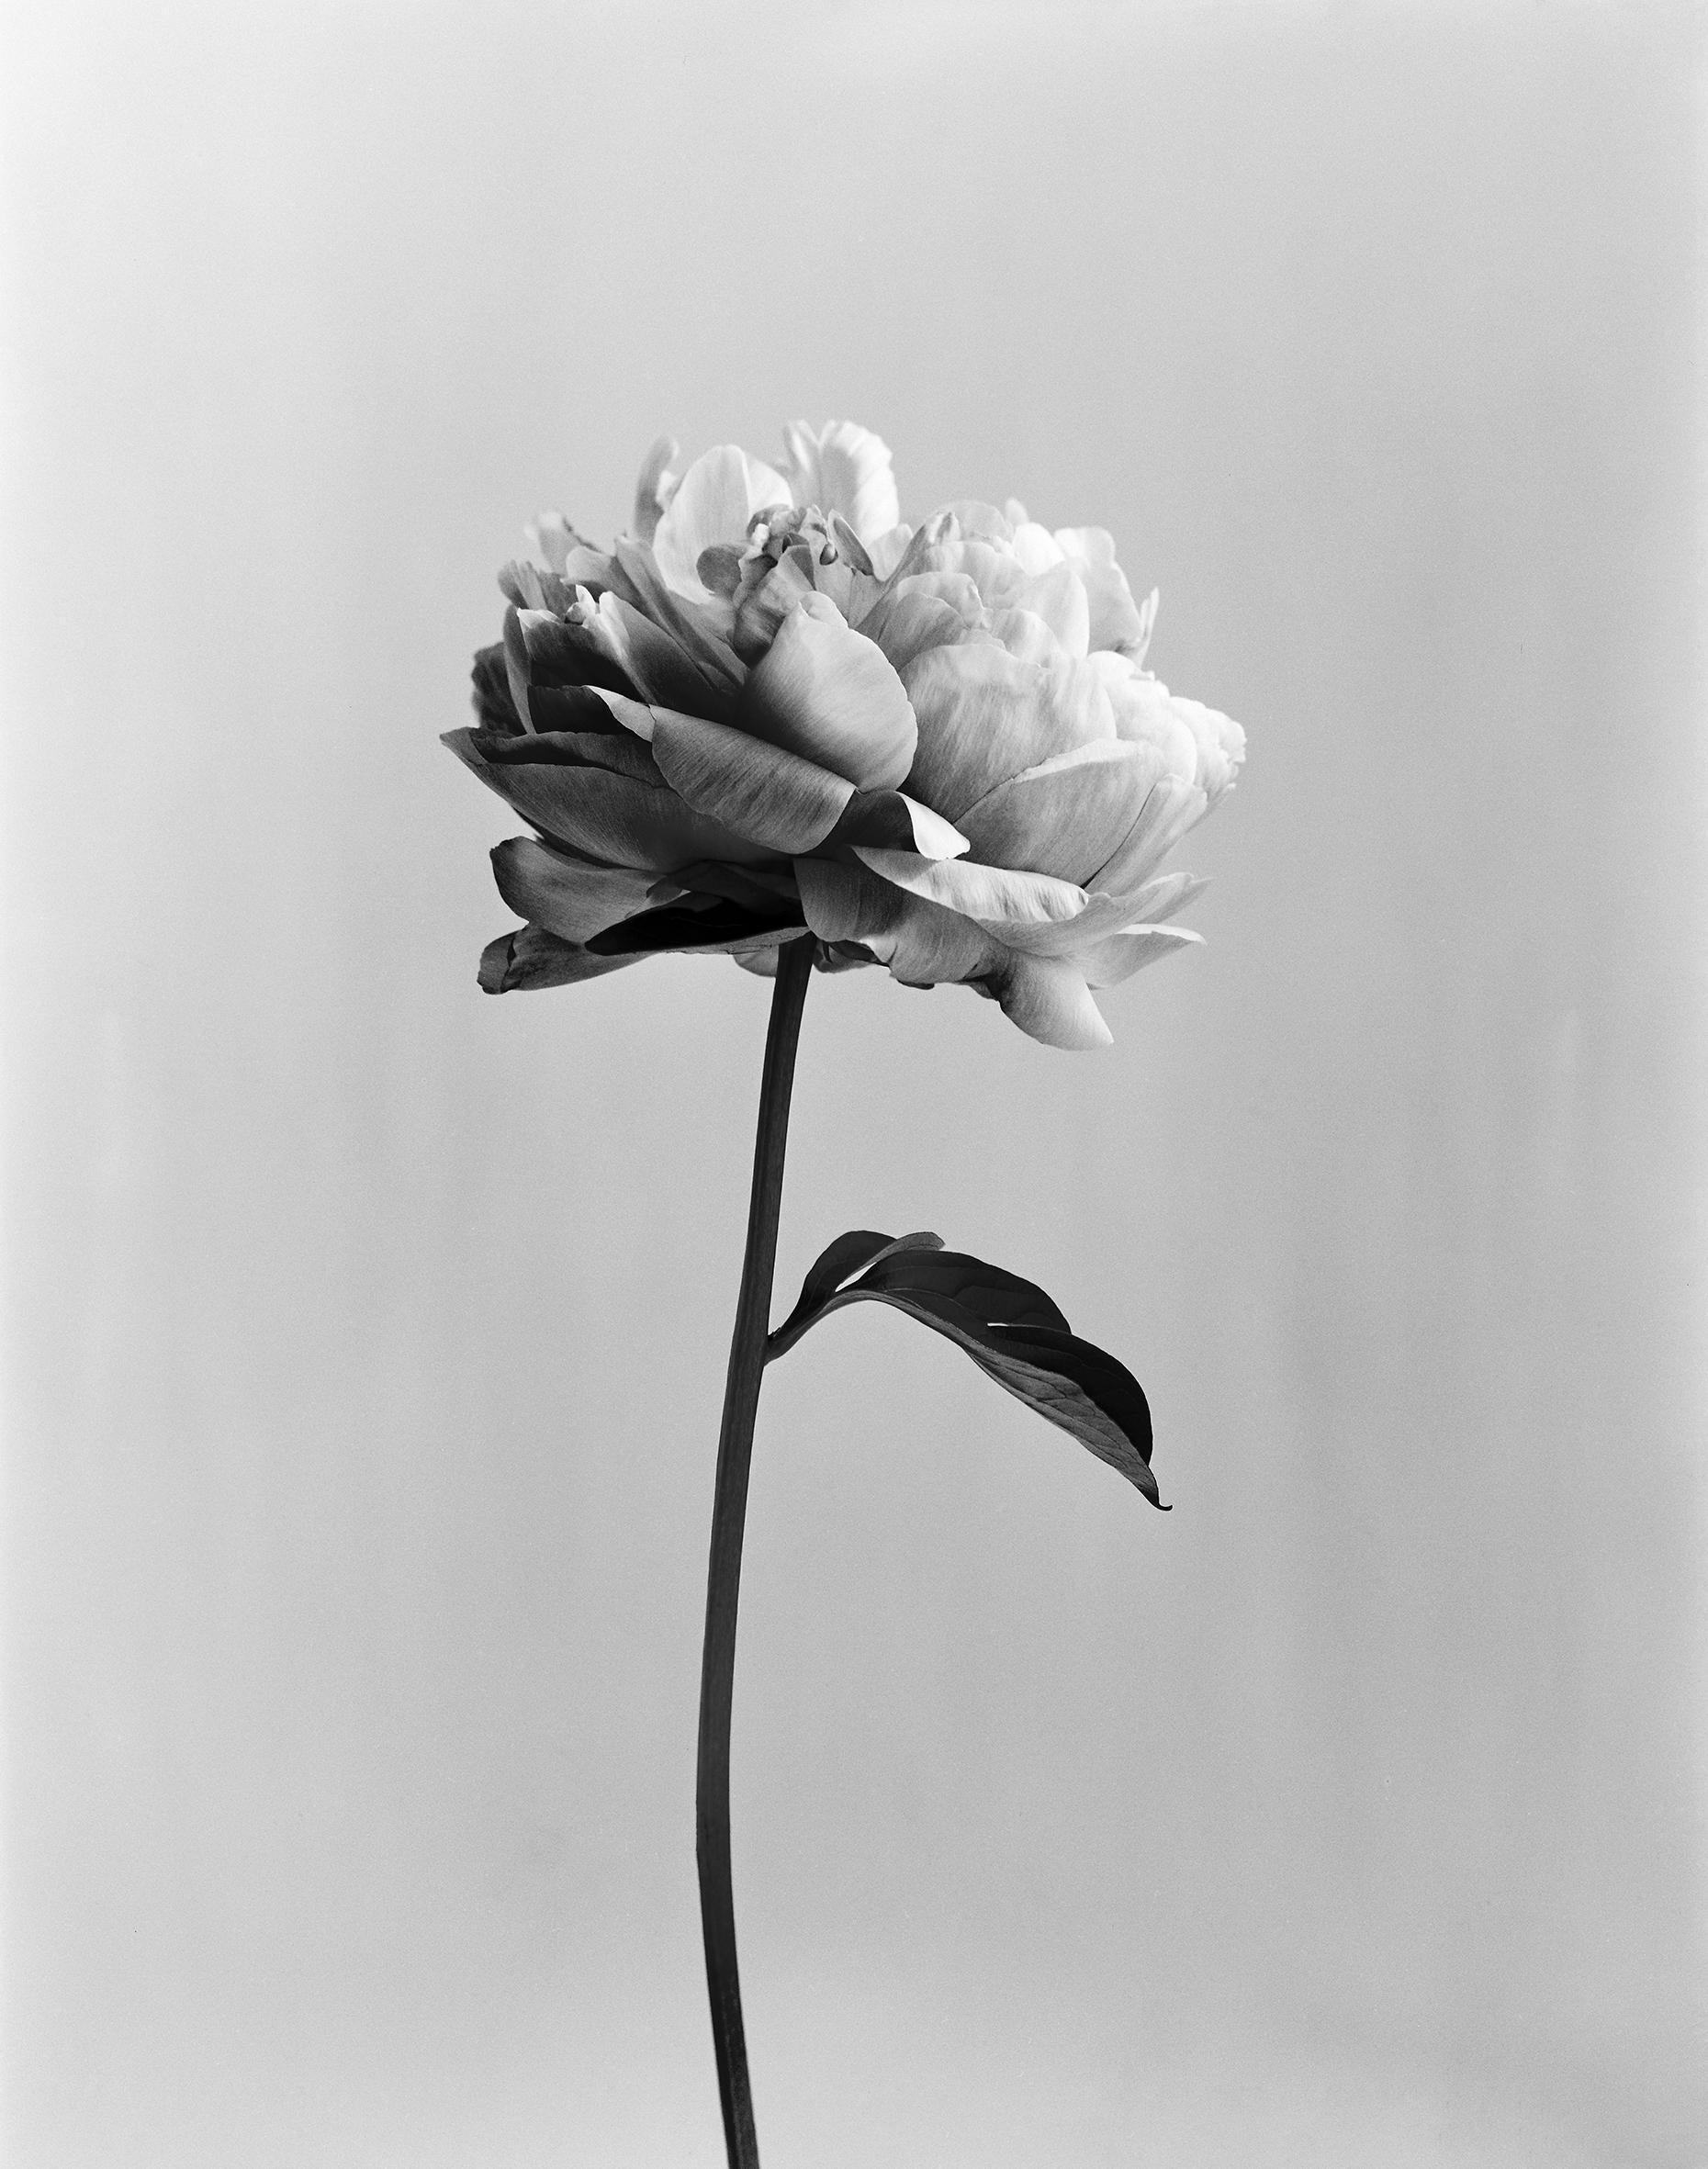 Peony No.3 analogue black and white floral photography, limited edition 3 of 10